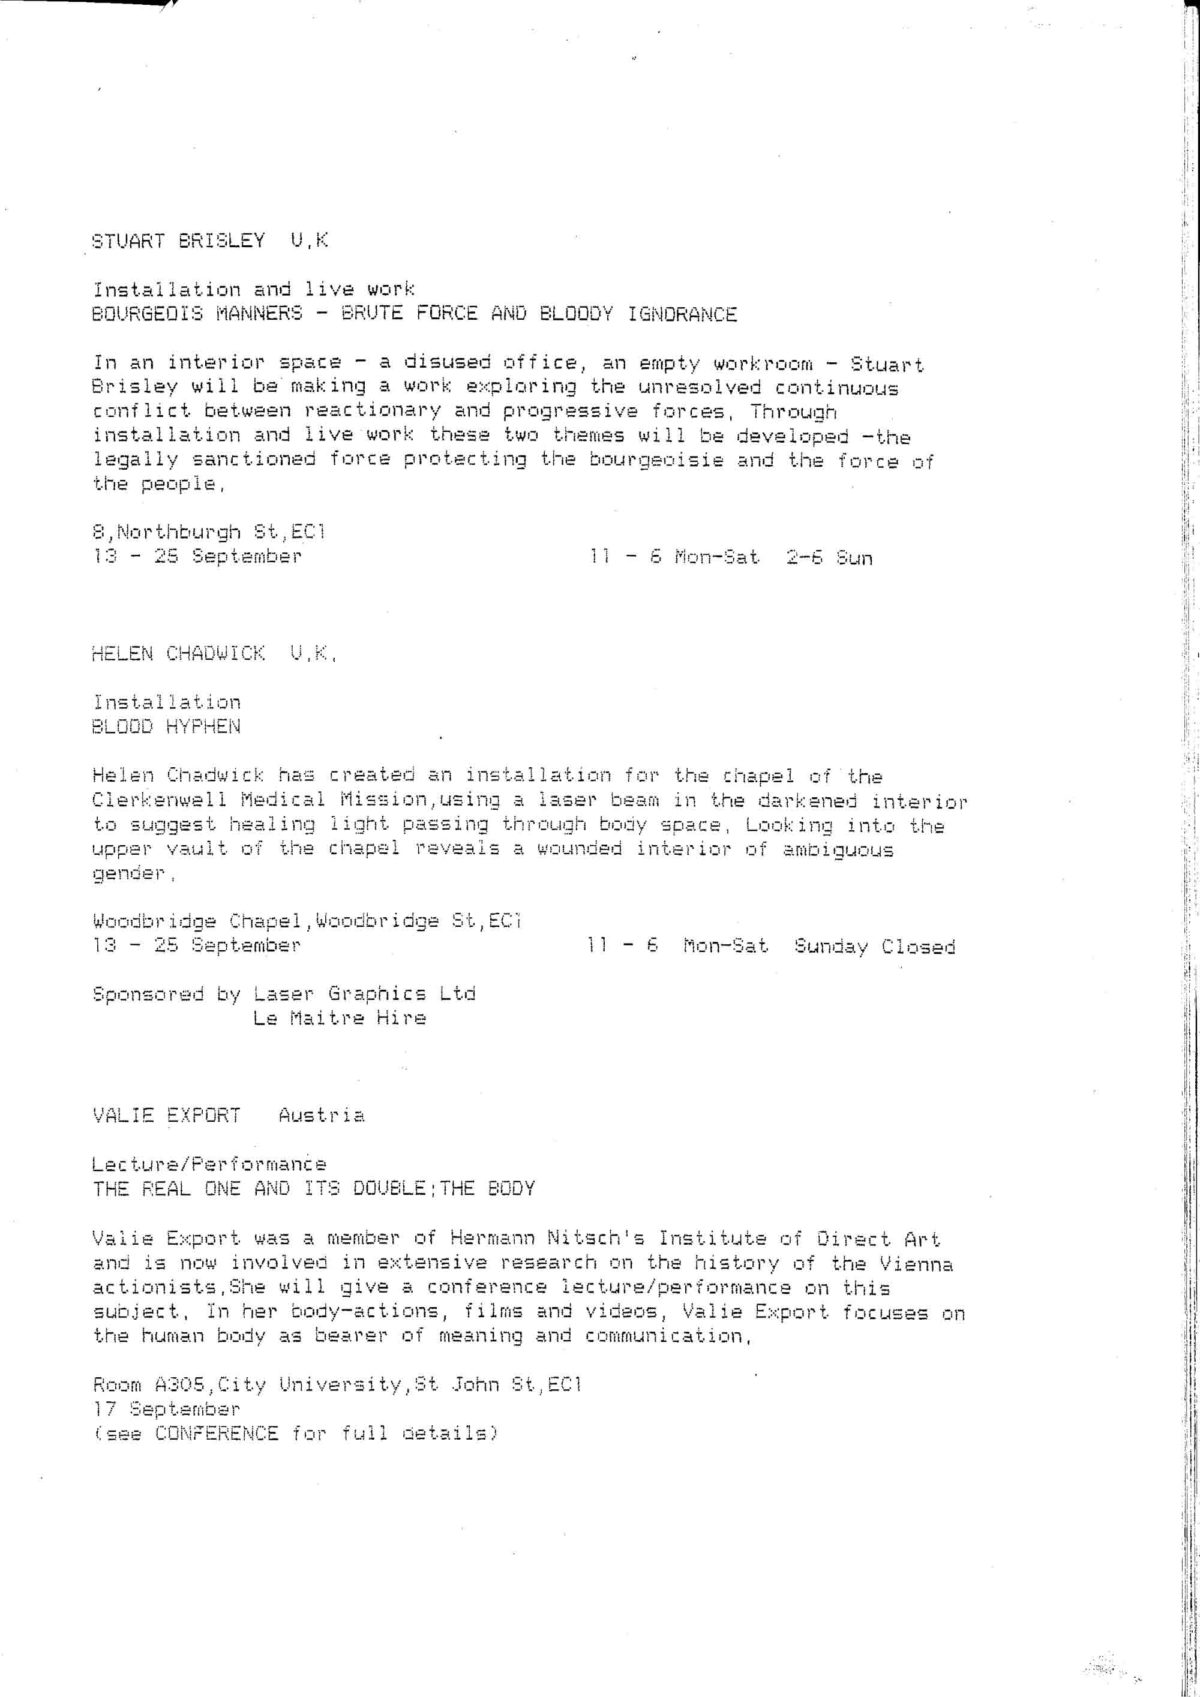 Full Programme Details, 1988 (Page 3 of 13)